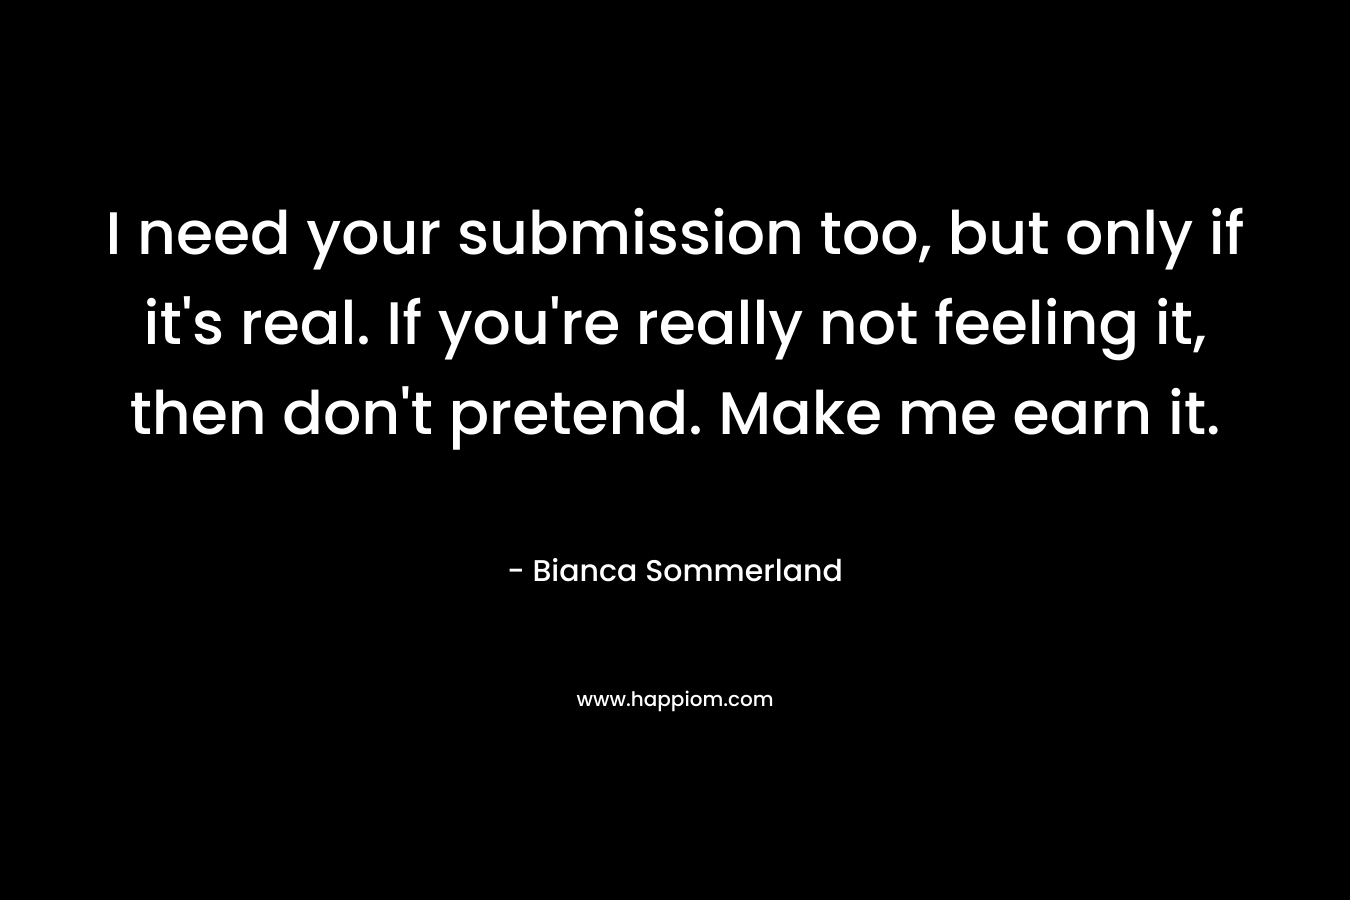 I need your submission too, but only if it’s real. If you’re really not feeling it, then don’t pretend. Make me earn it. – Bianca Sommerland